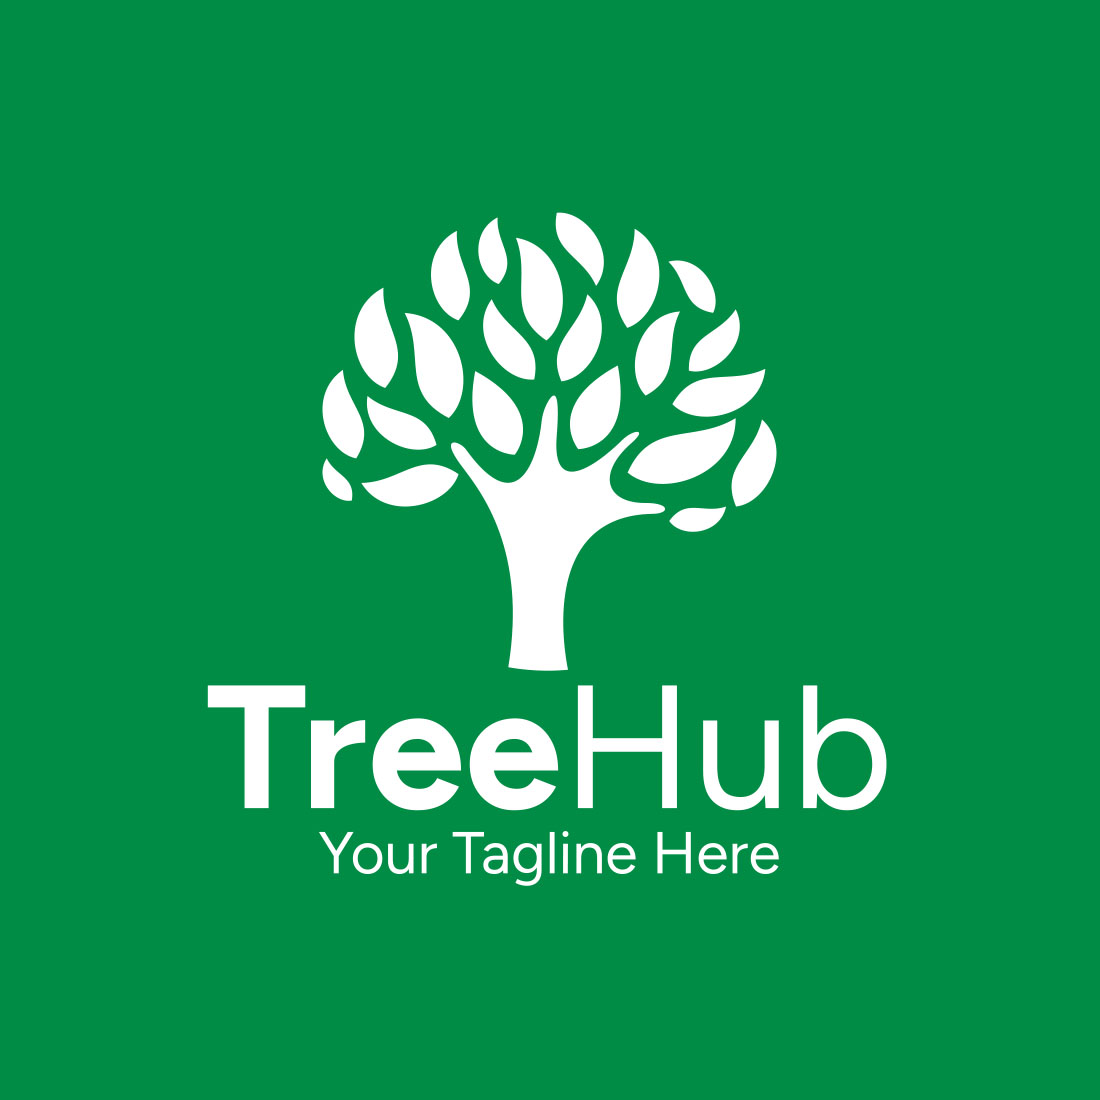 Tree Hub Logo Template with green background.